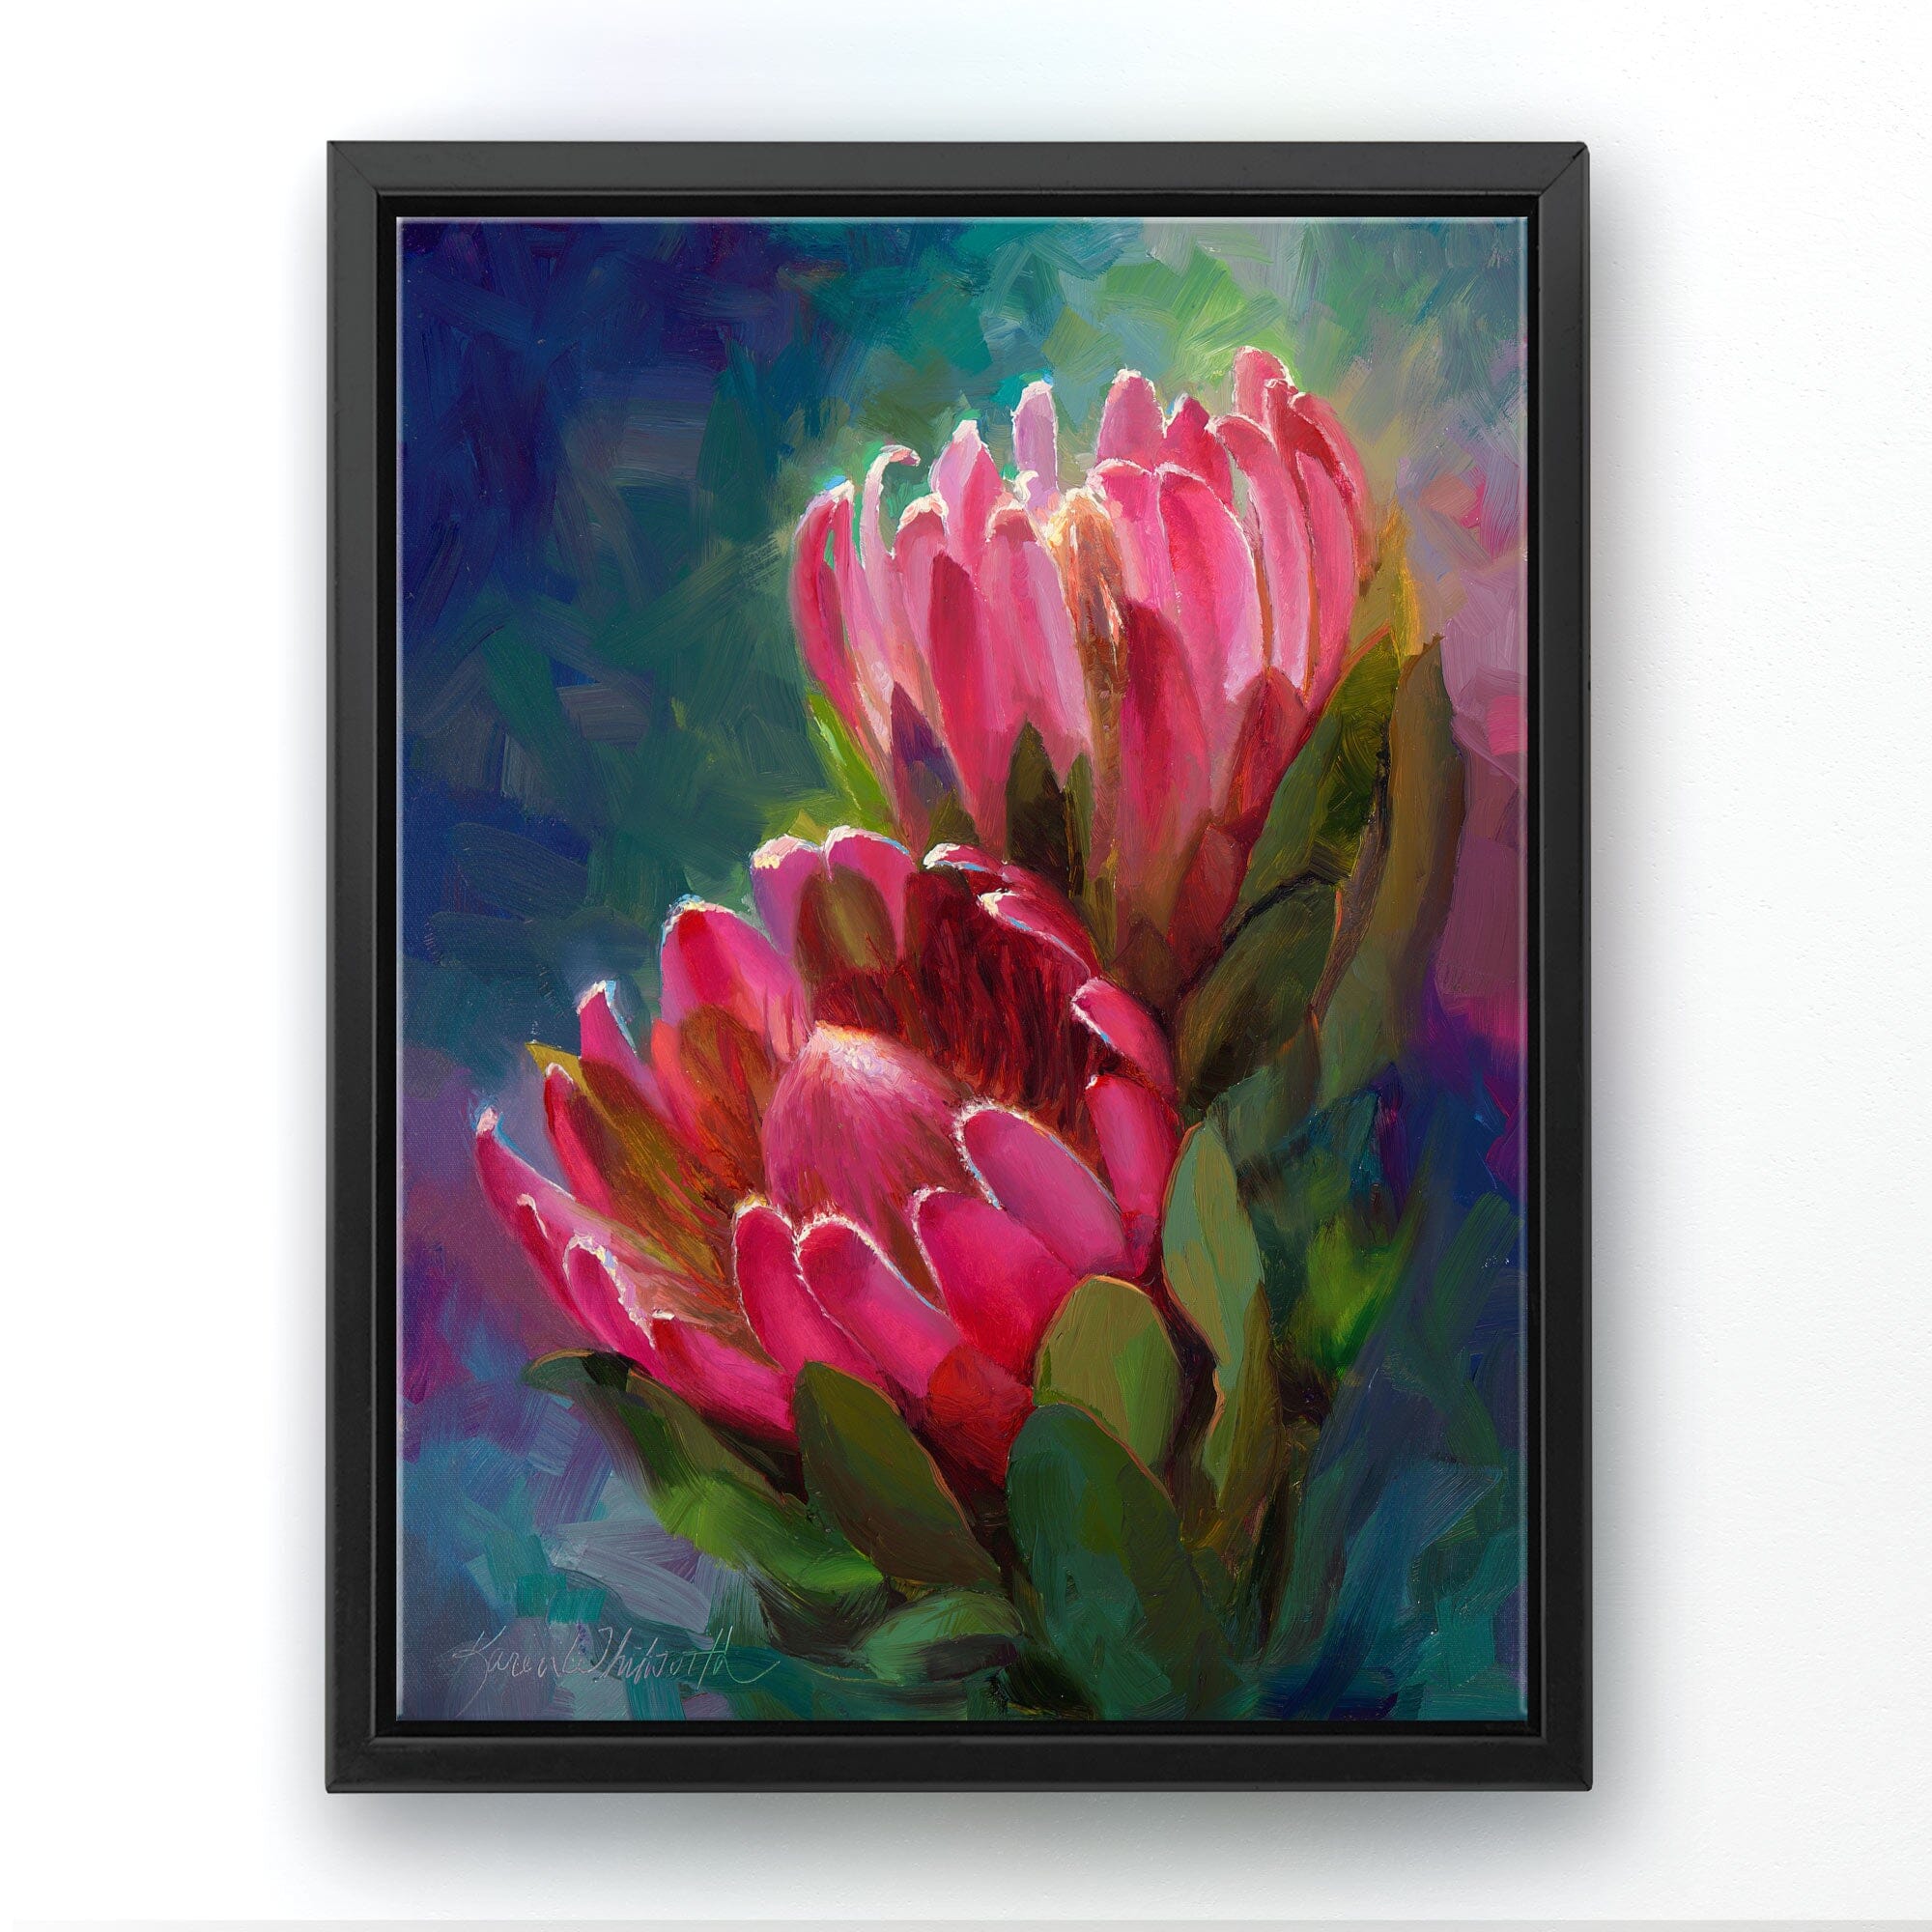 Protea canvas art of tropical pink flowers by floral artist Karen Whitworth. The artwork is framed in a black floater frame and is hanging on a white wall. 